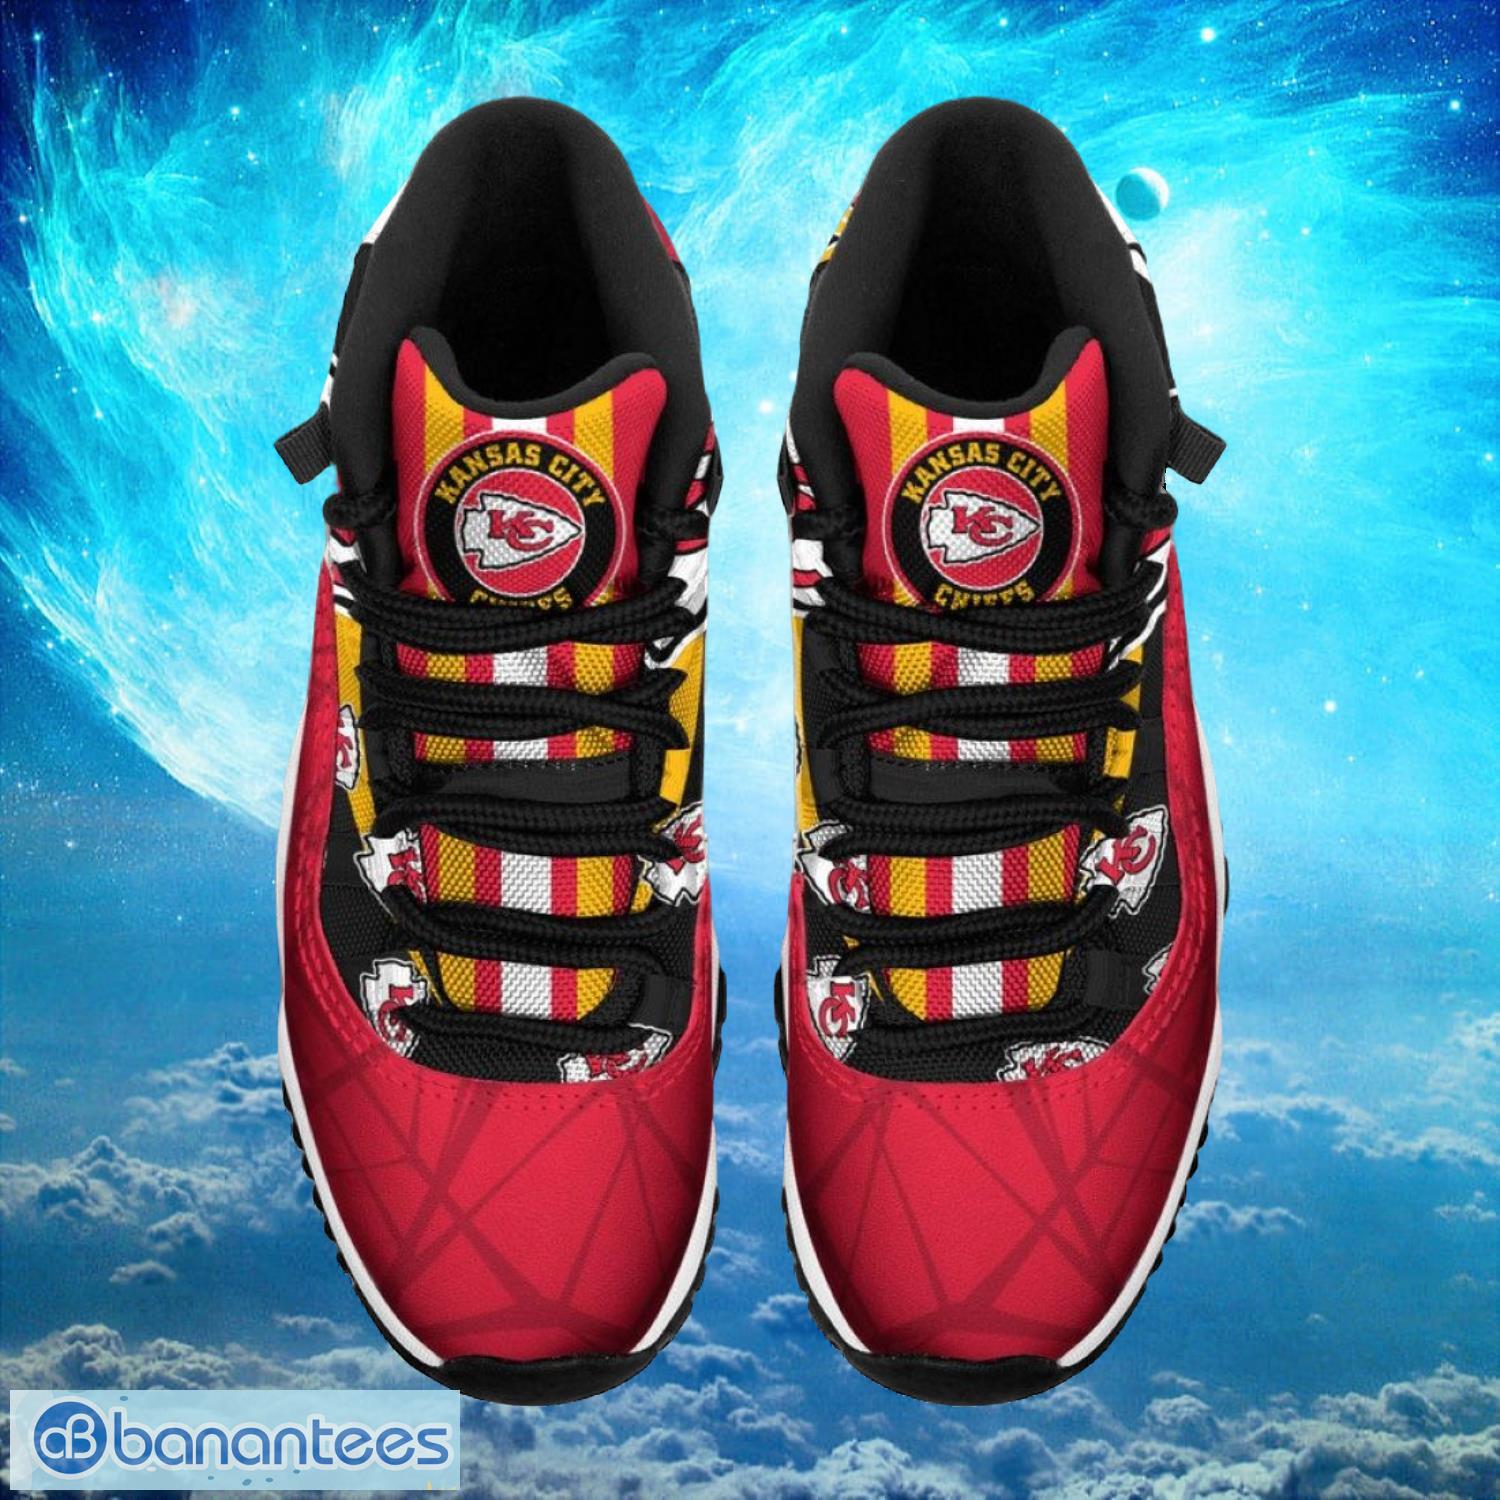 Kansas City Chiefs NFL Air Jordan 11 Sneakers Shoes Gift For Fans Product Photo 2